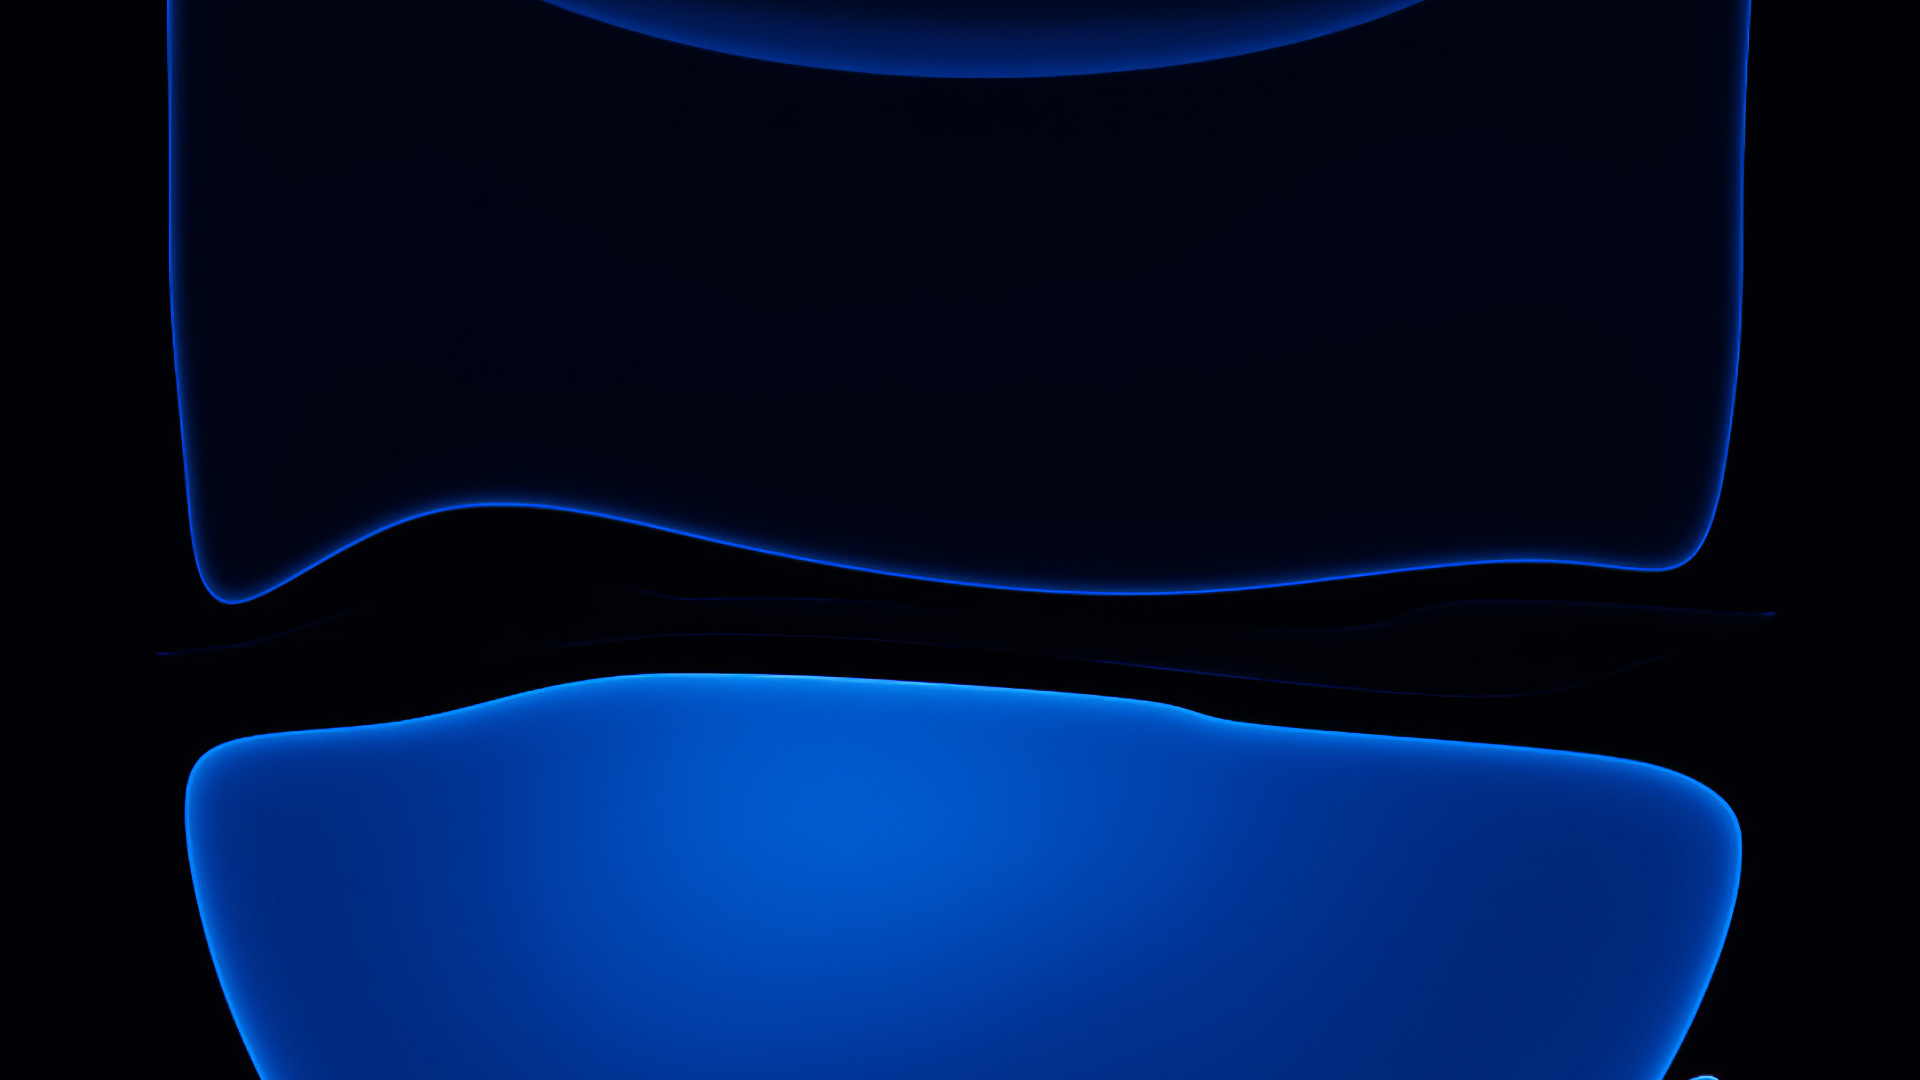 Blue and White Digital Wallpaper. Wallpaper in 1920x1080 Resolution